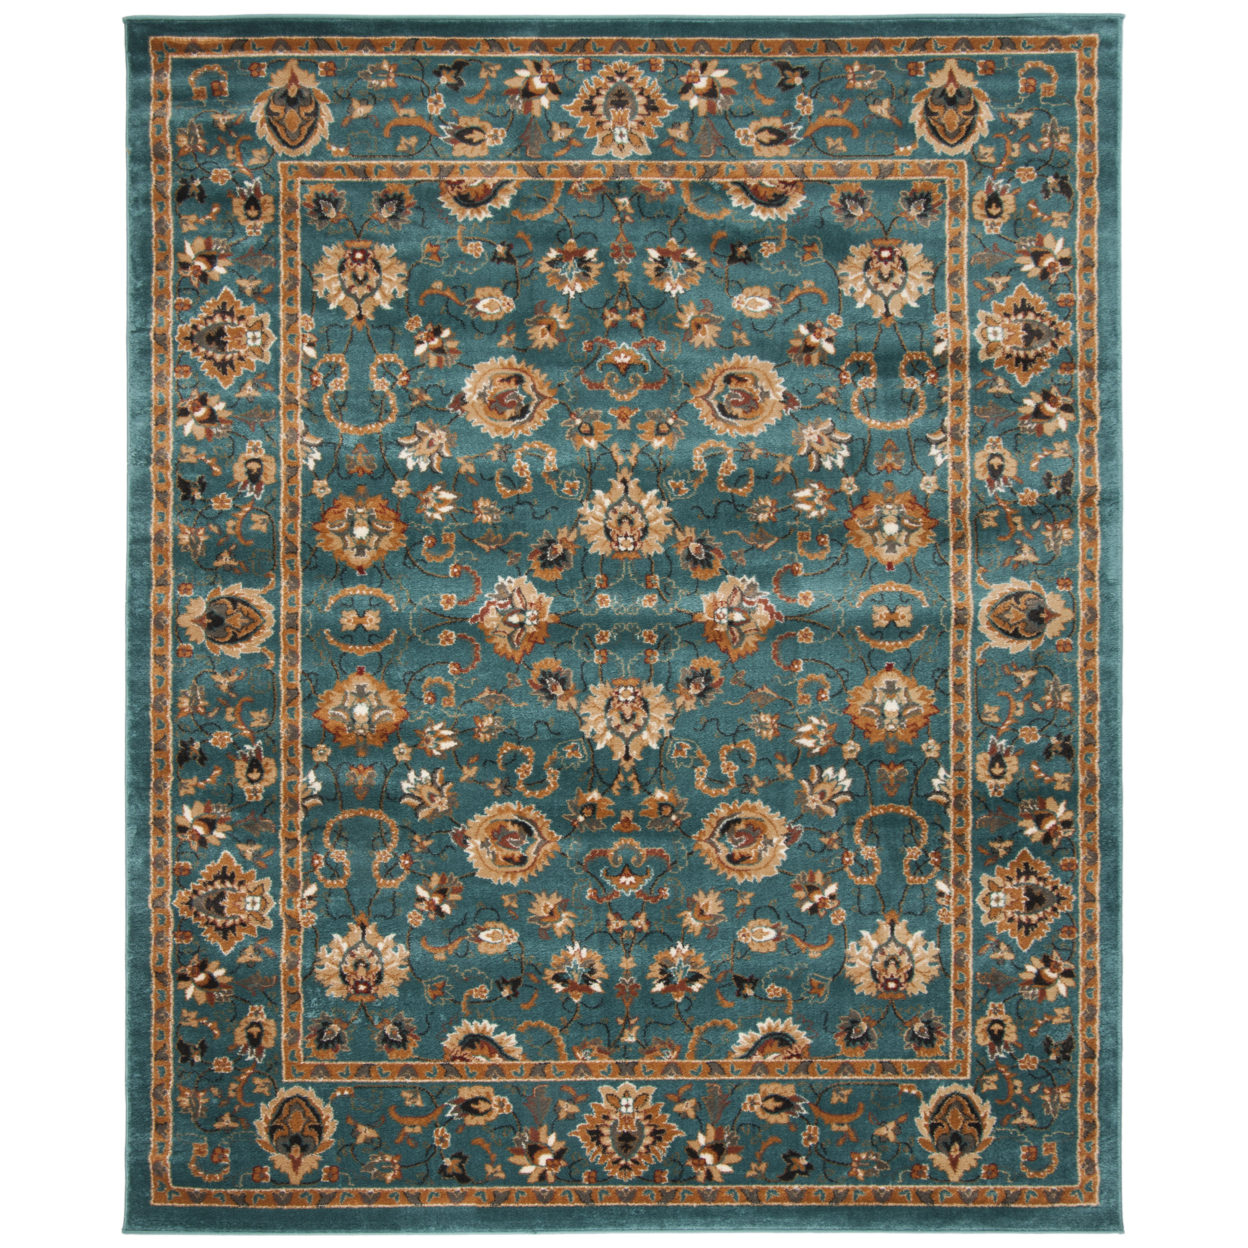 SAFAVIEH Summit Collection SMT297L Teal / Teal Rug - 3' X 5'